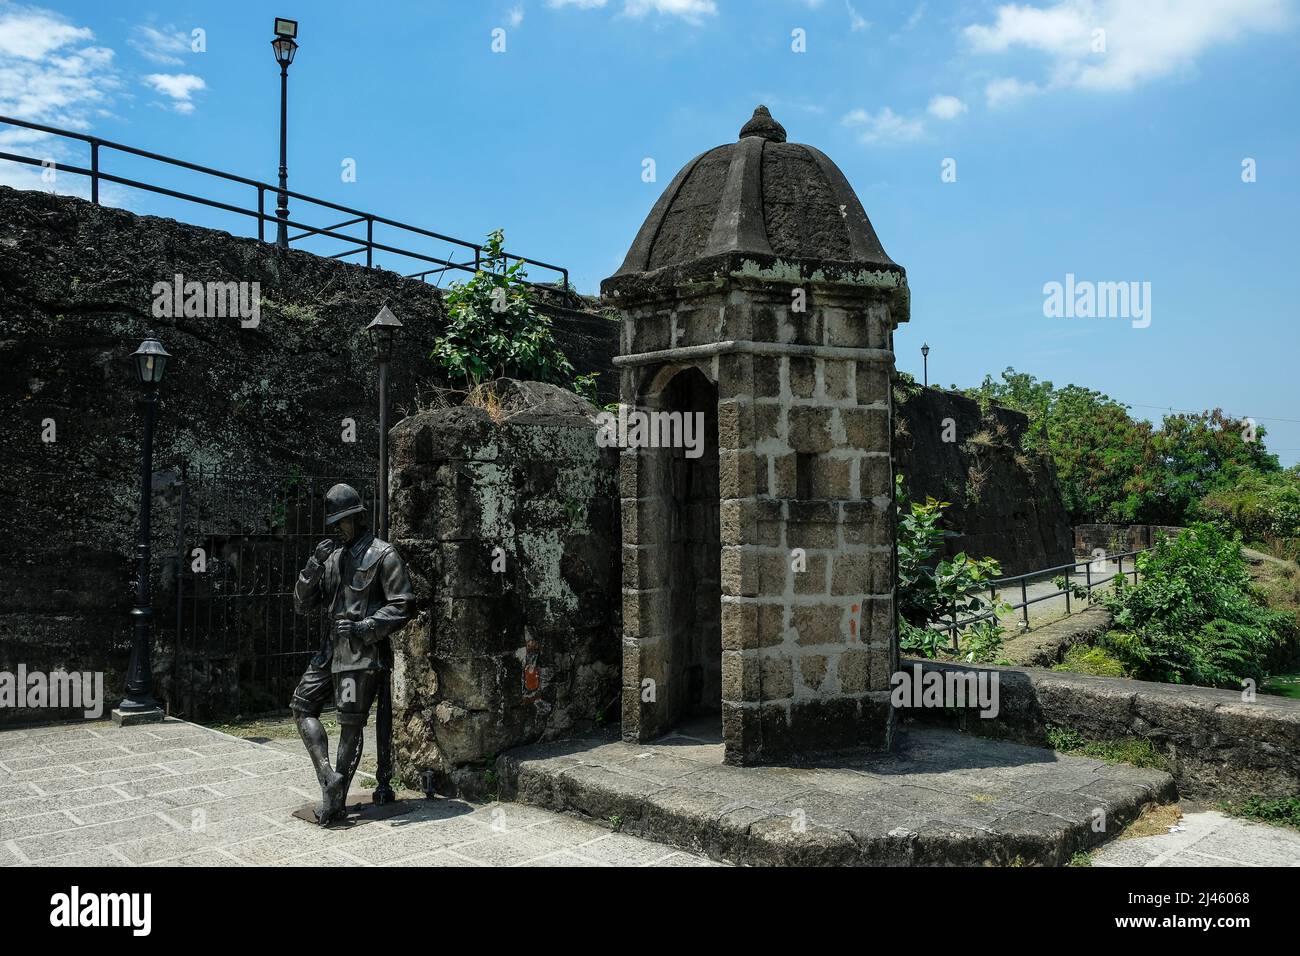 Fort Santiago in Intramuros, Manila, Philippines. The defense fortress is located in Intramuros, the walled city of Manila. Stock Photo